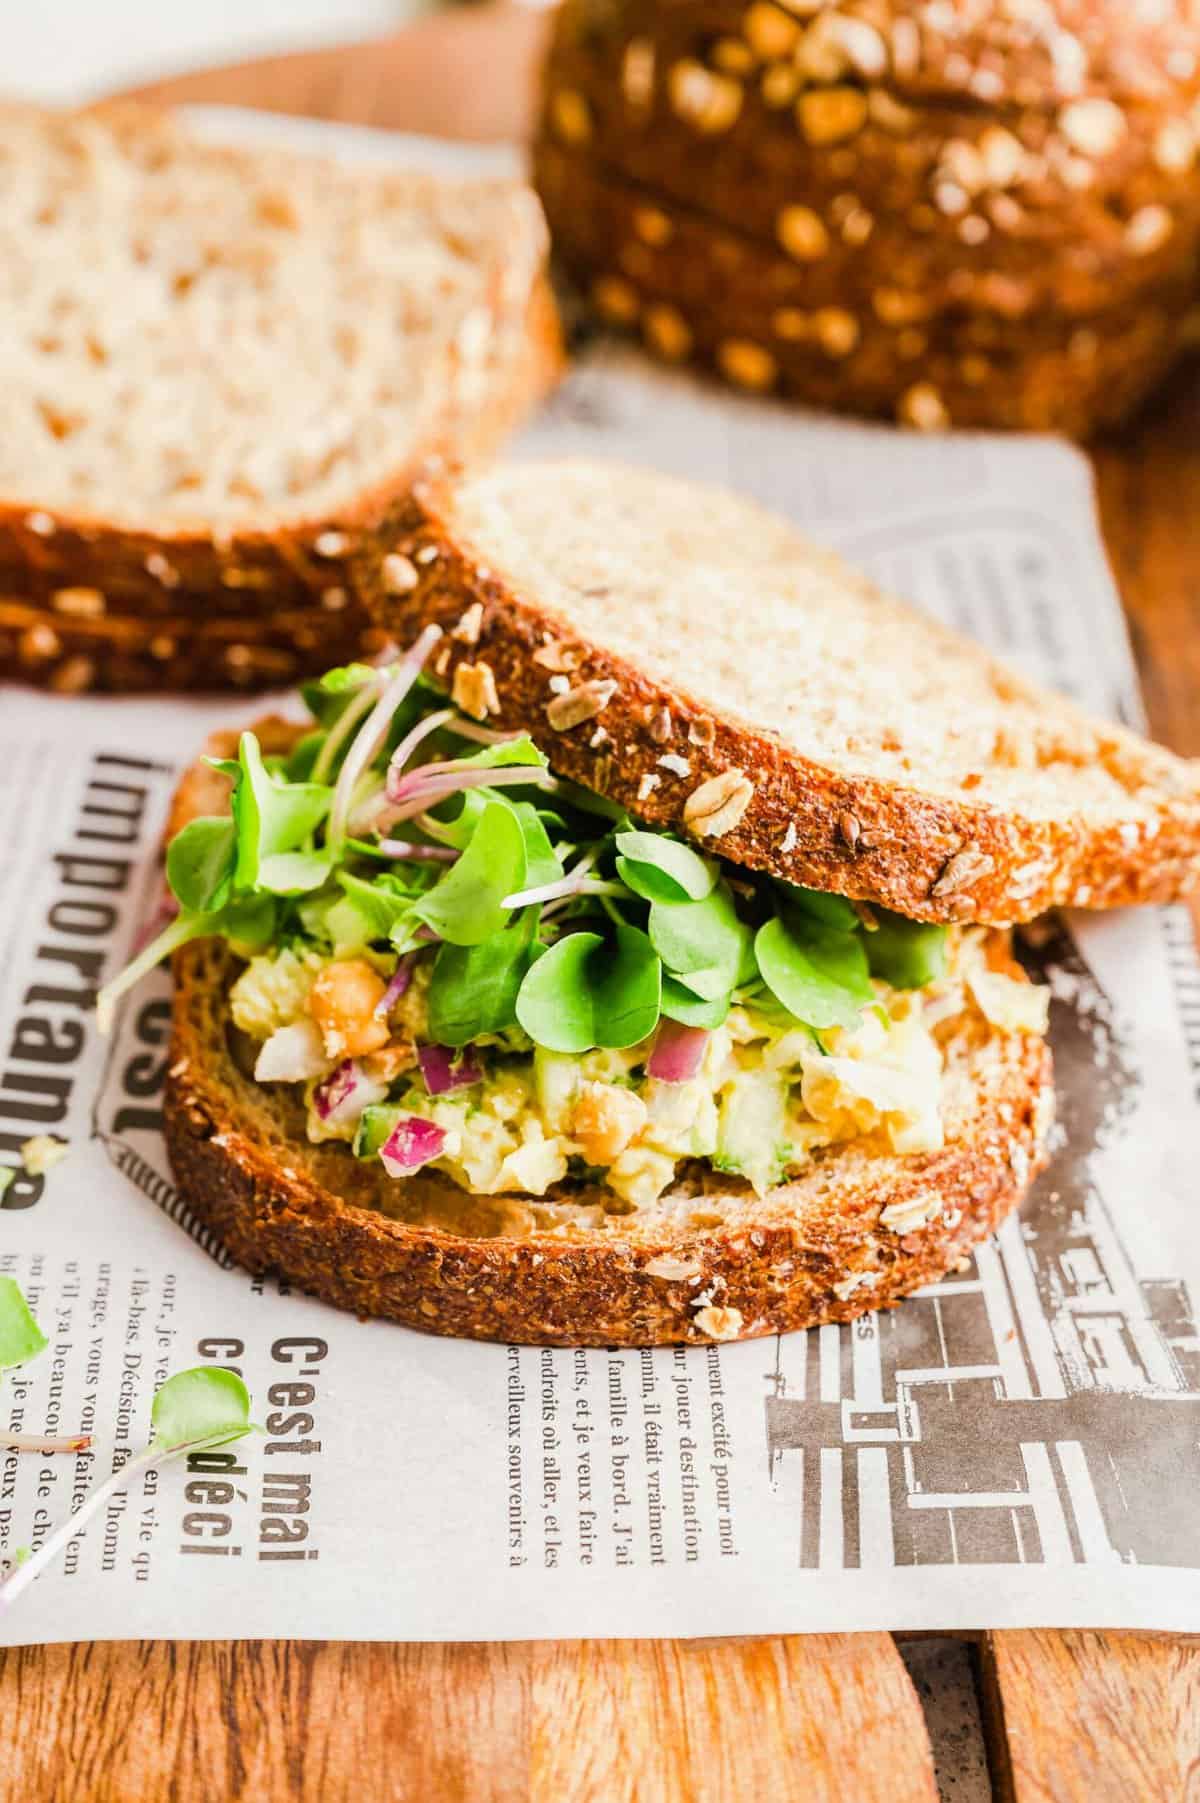 Smashed chickpea sandwich, with slices of bread in background